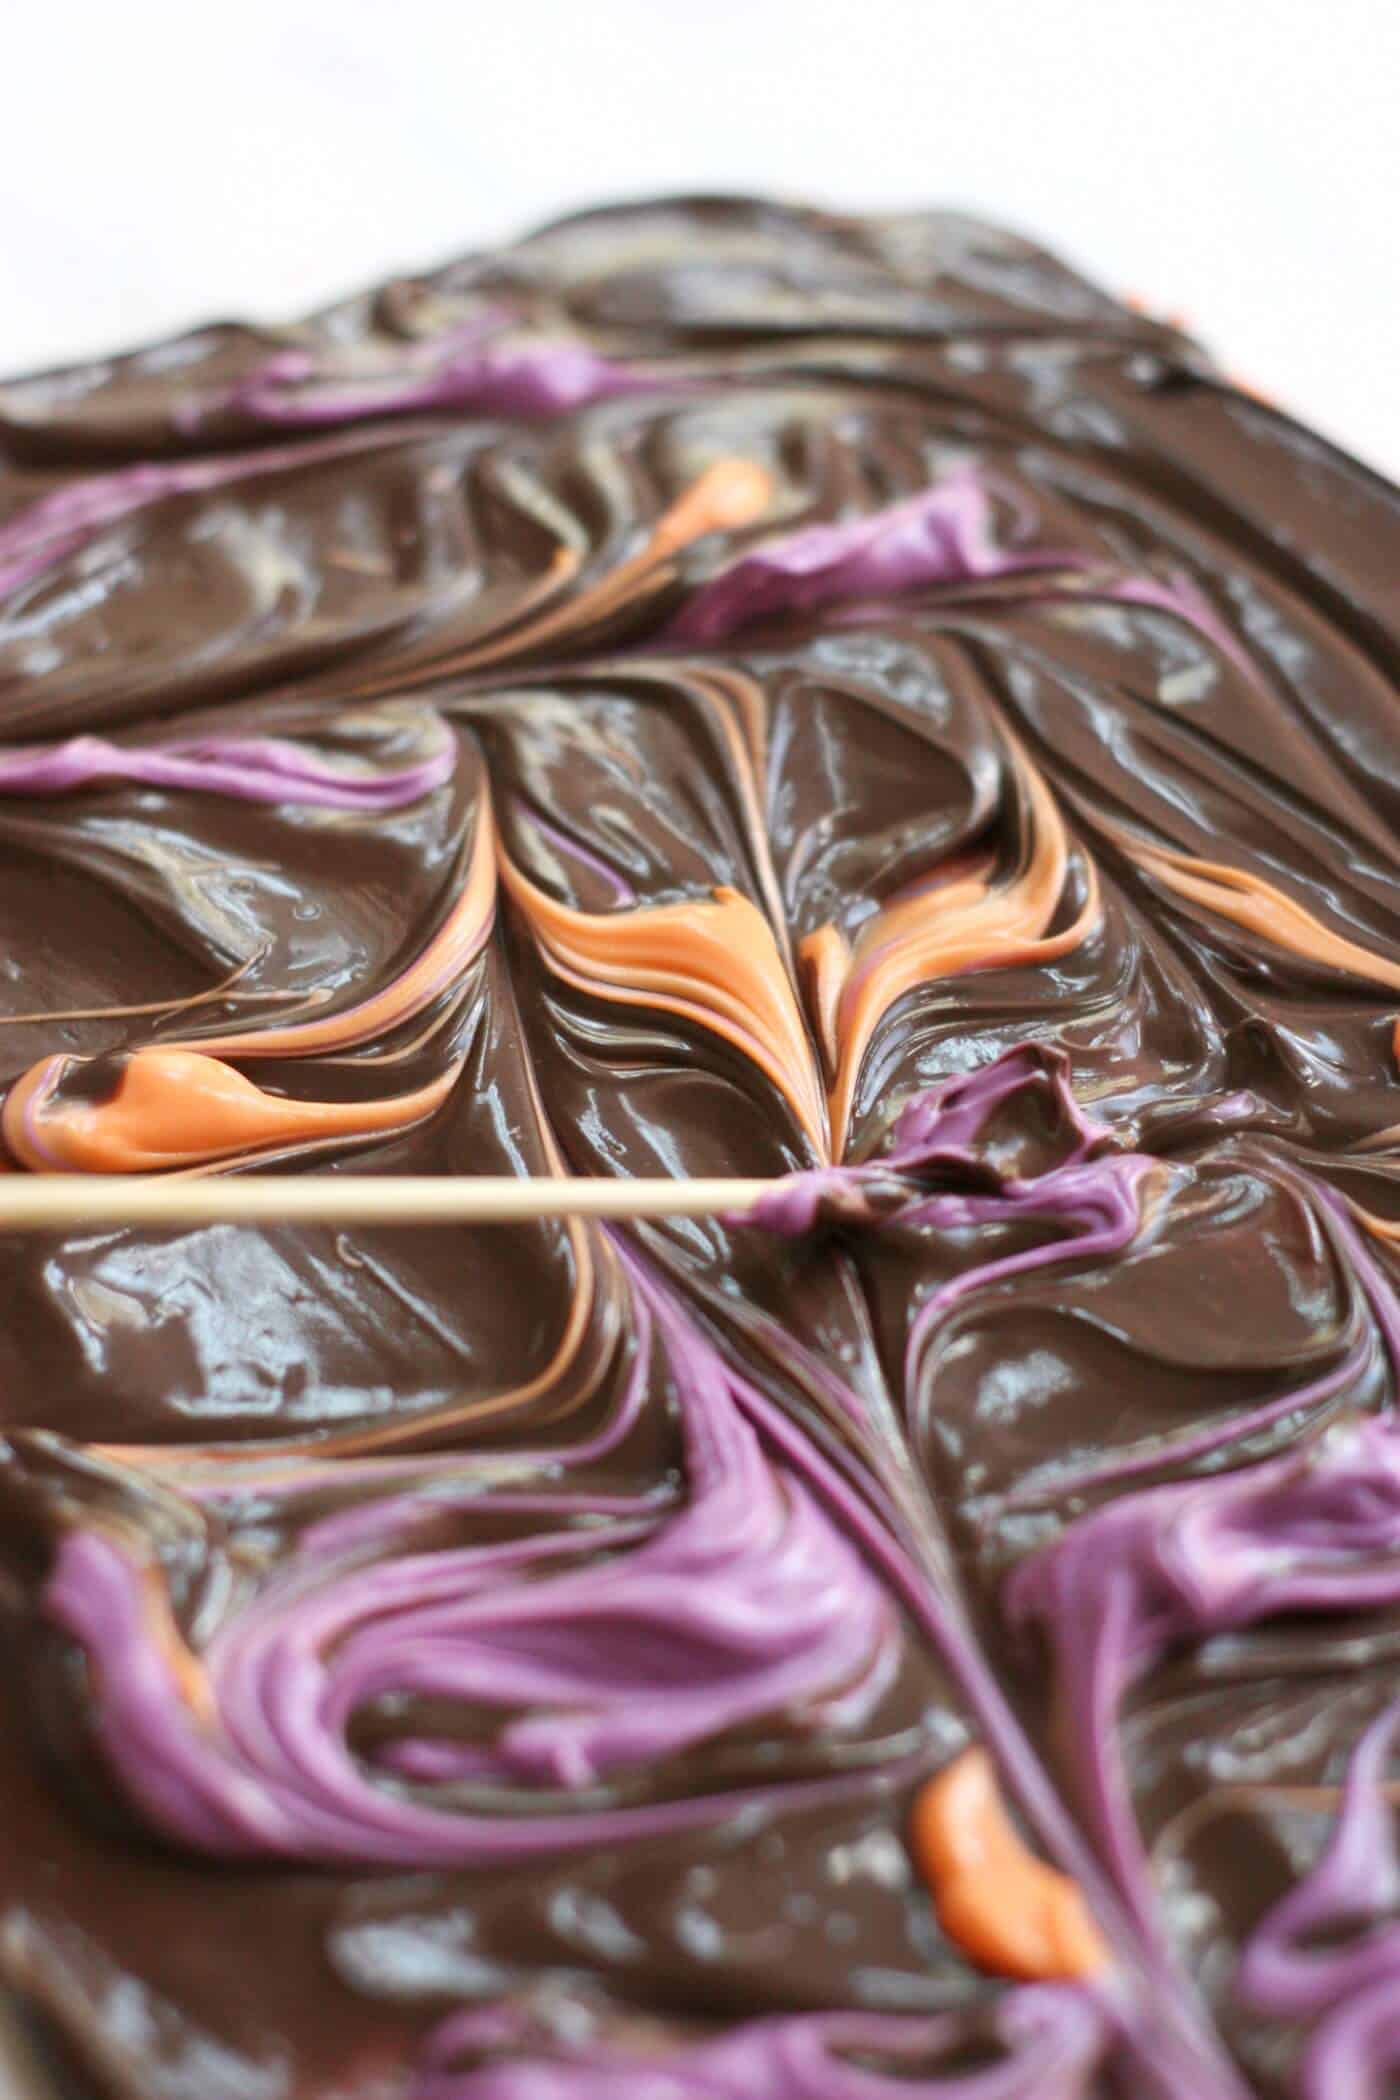 Halloween bark recipe - swirling with a toothpick